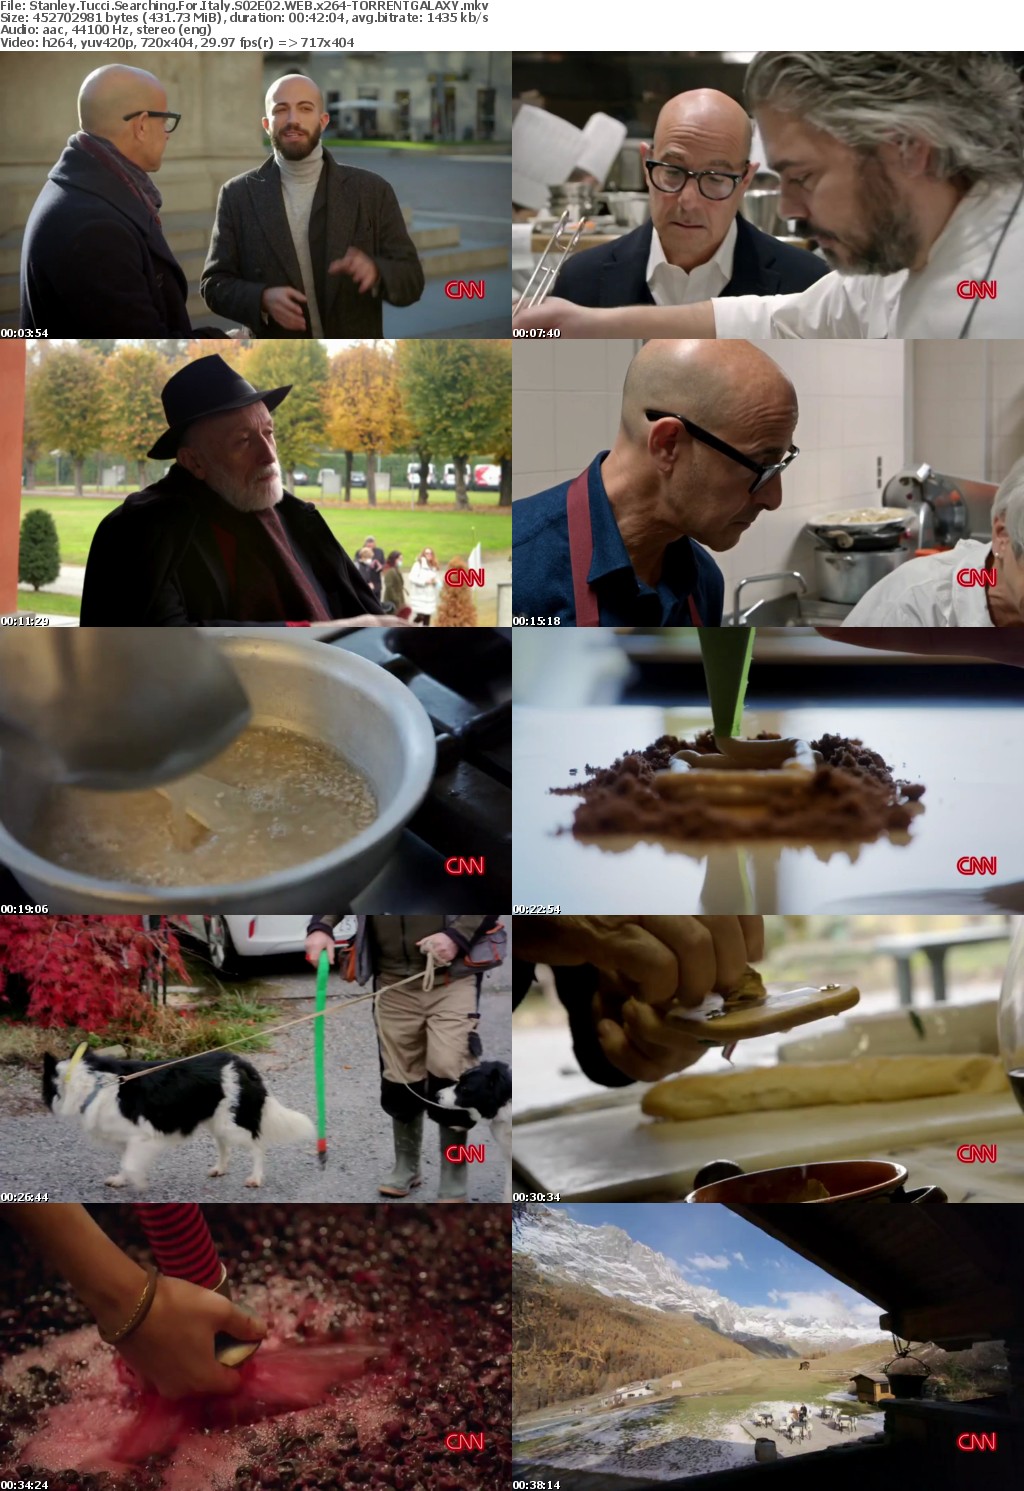 Stanley Tucci Searching For Italy S02E02 WEB x264-GALAXY